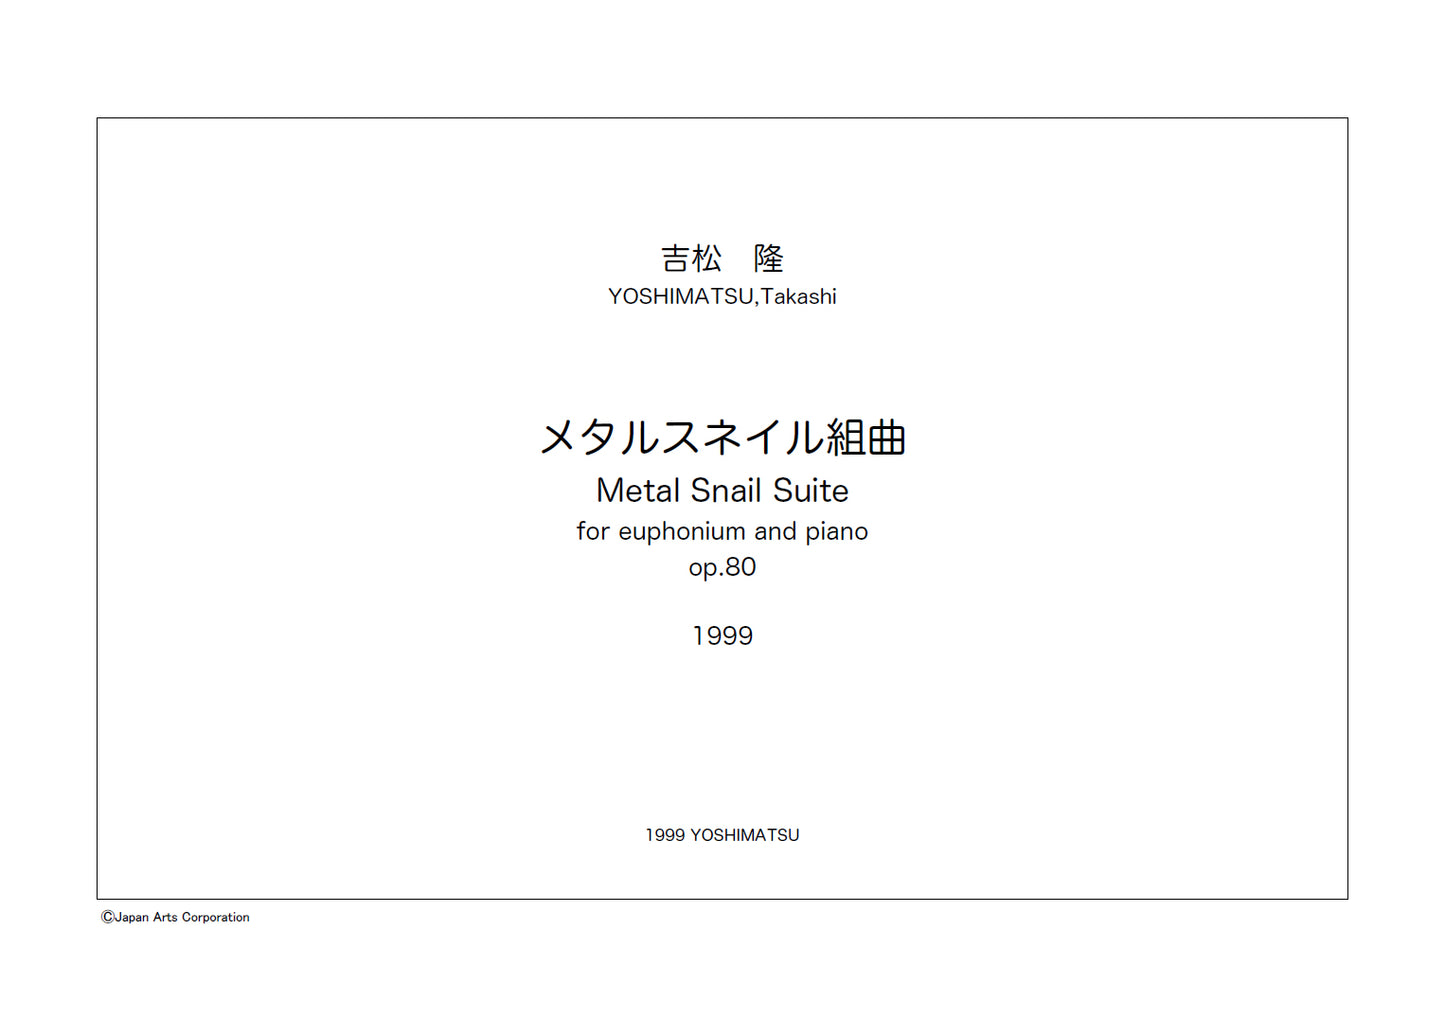 Metal Snail Suite for euphonium and piano op.80